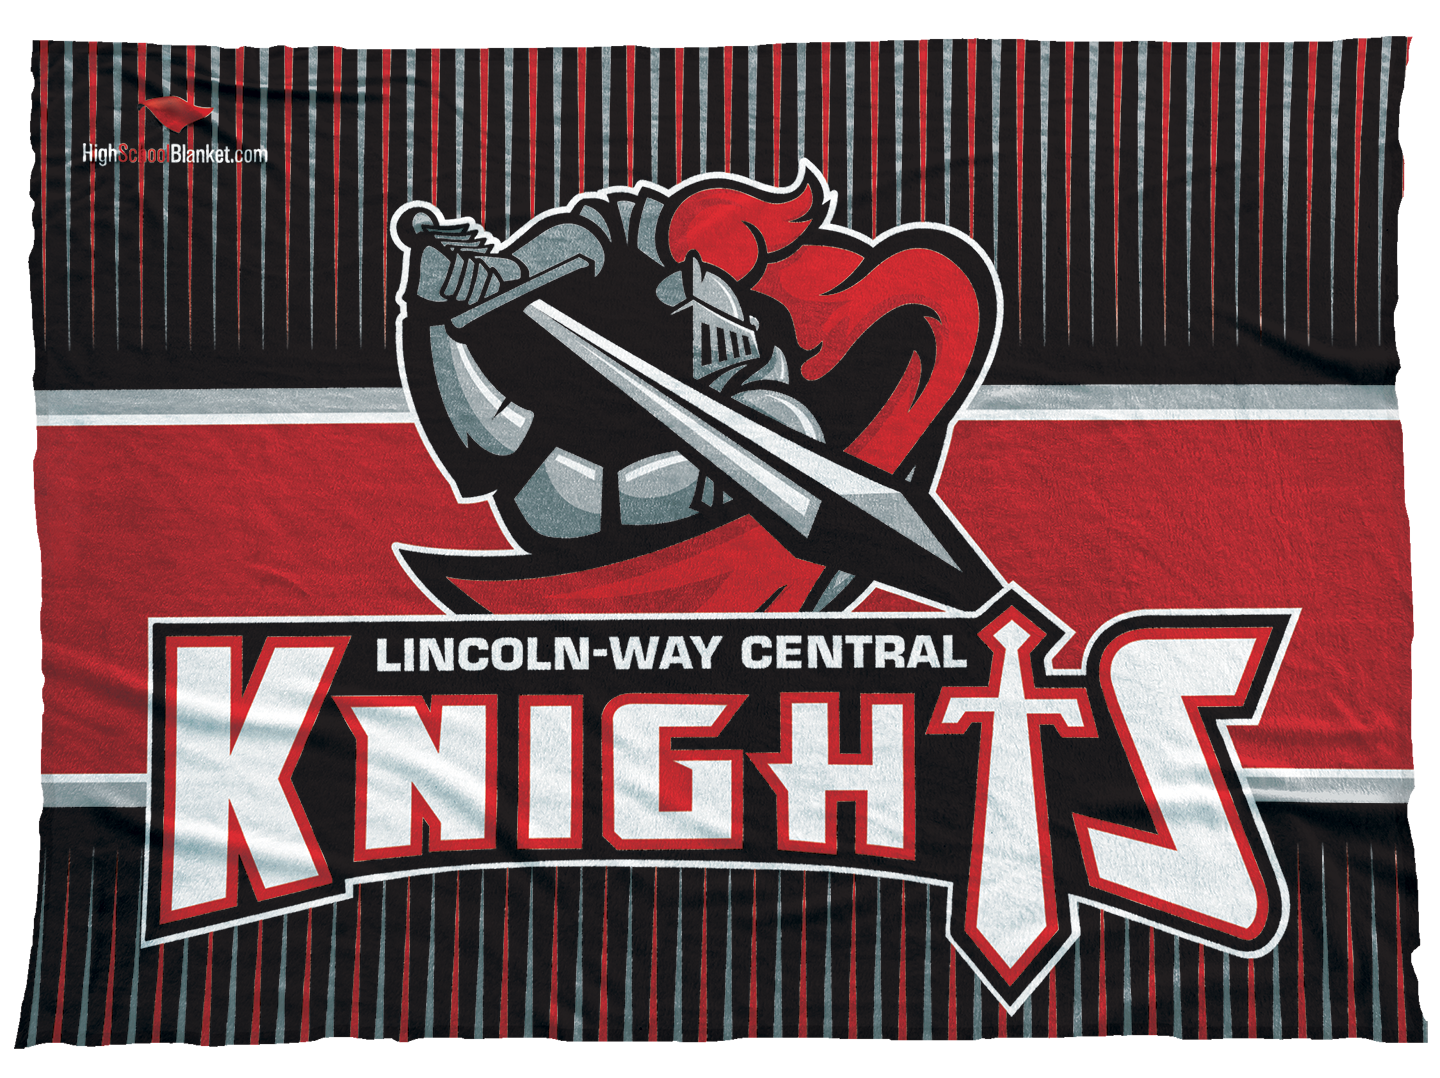 Lincoln-Way Central Knights